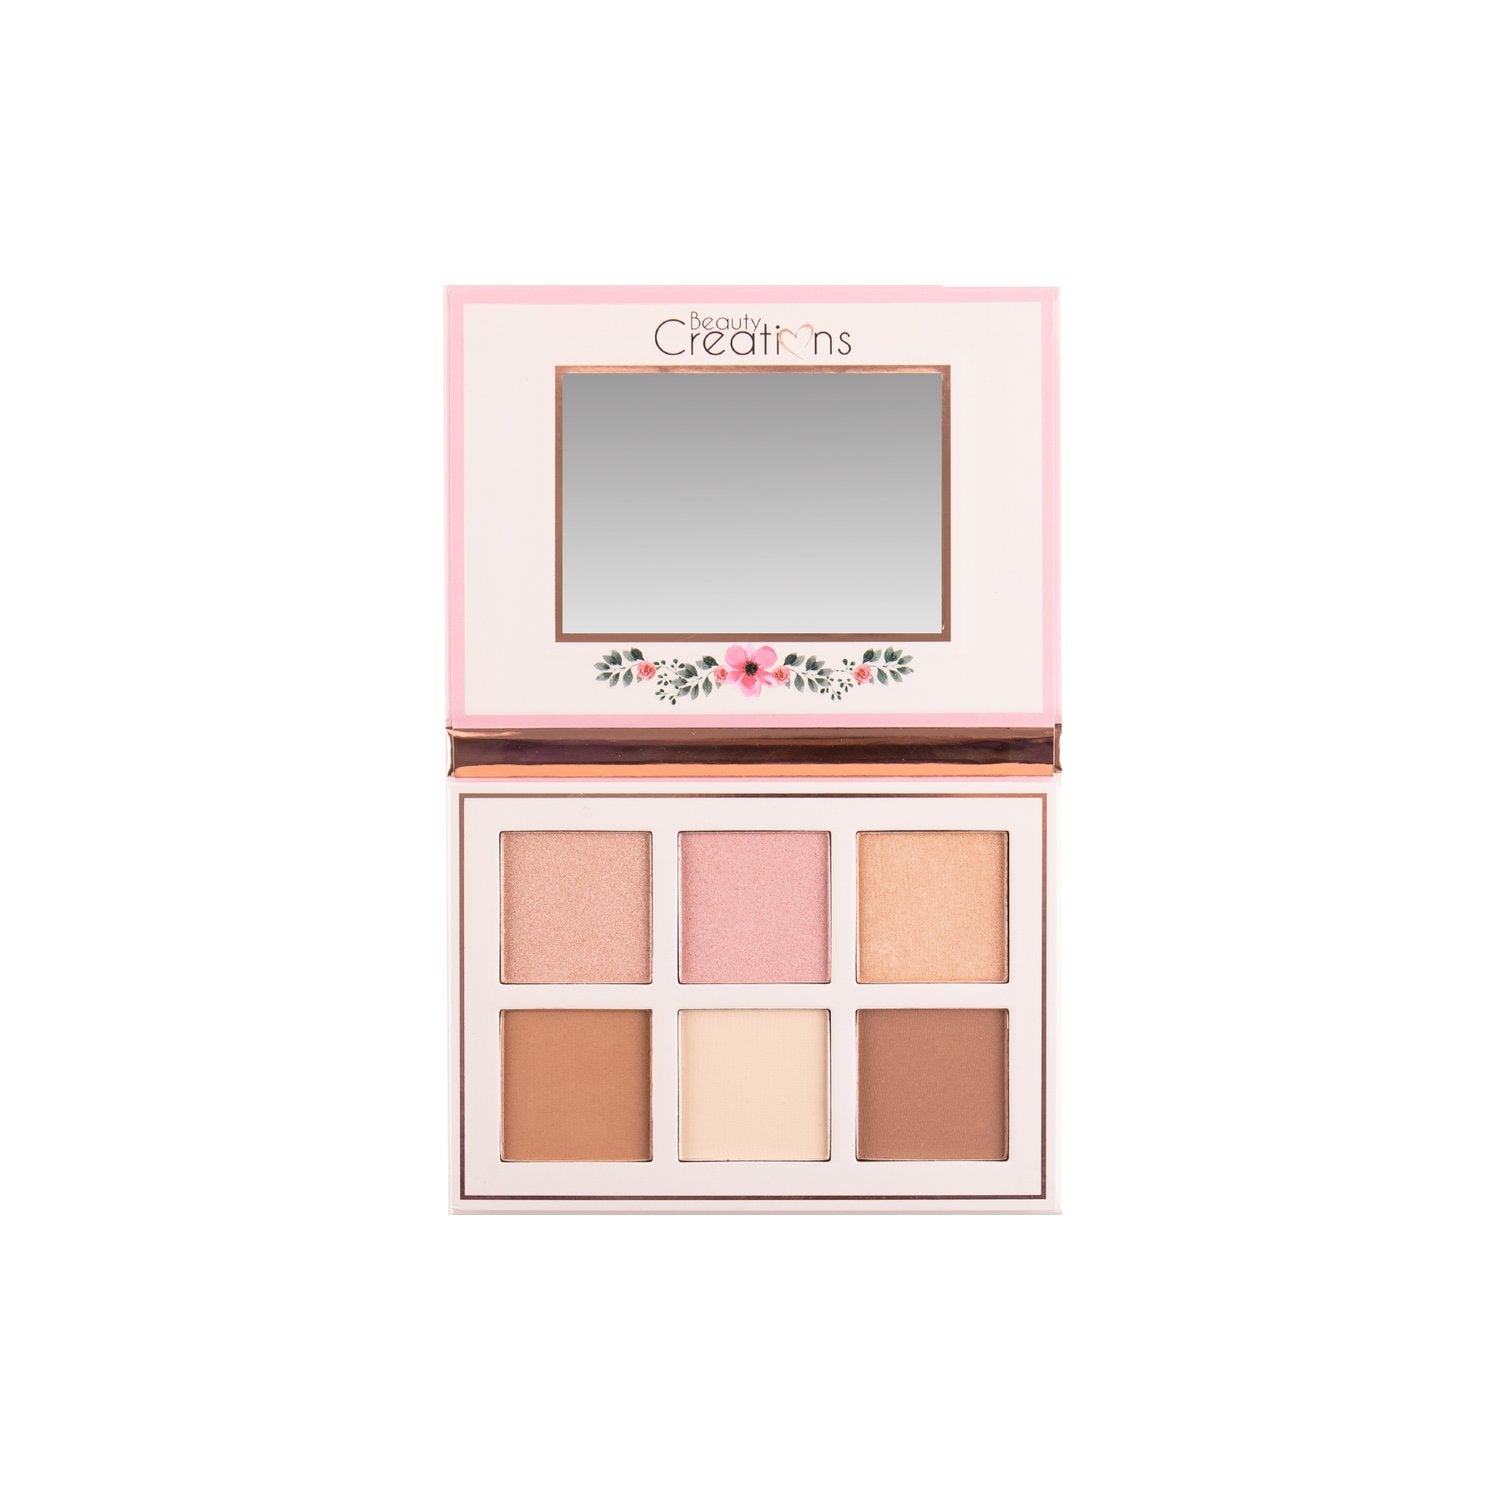 FLORAL BLOOM HIGHLIGHT & CONTOUR KIT BEAUTY CREATIONS